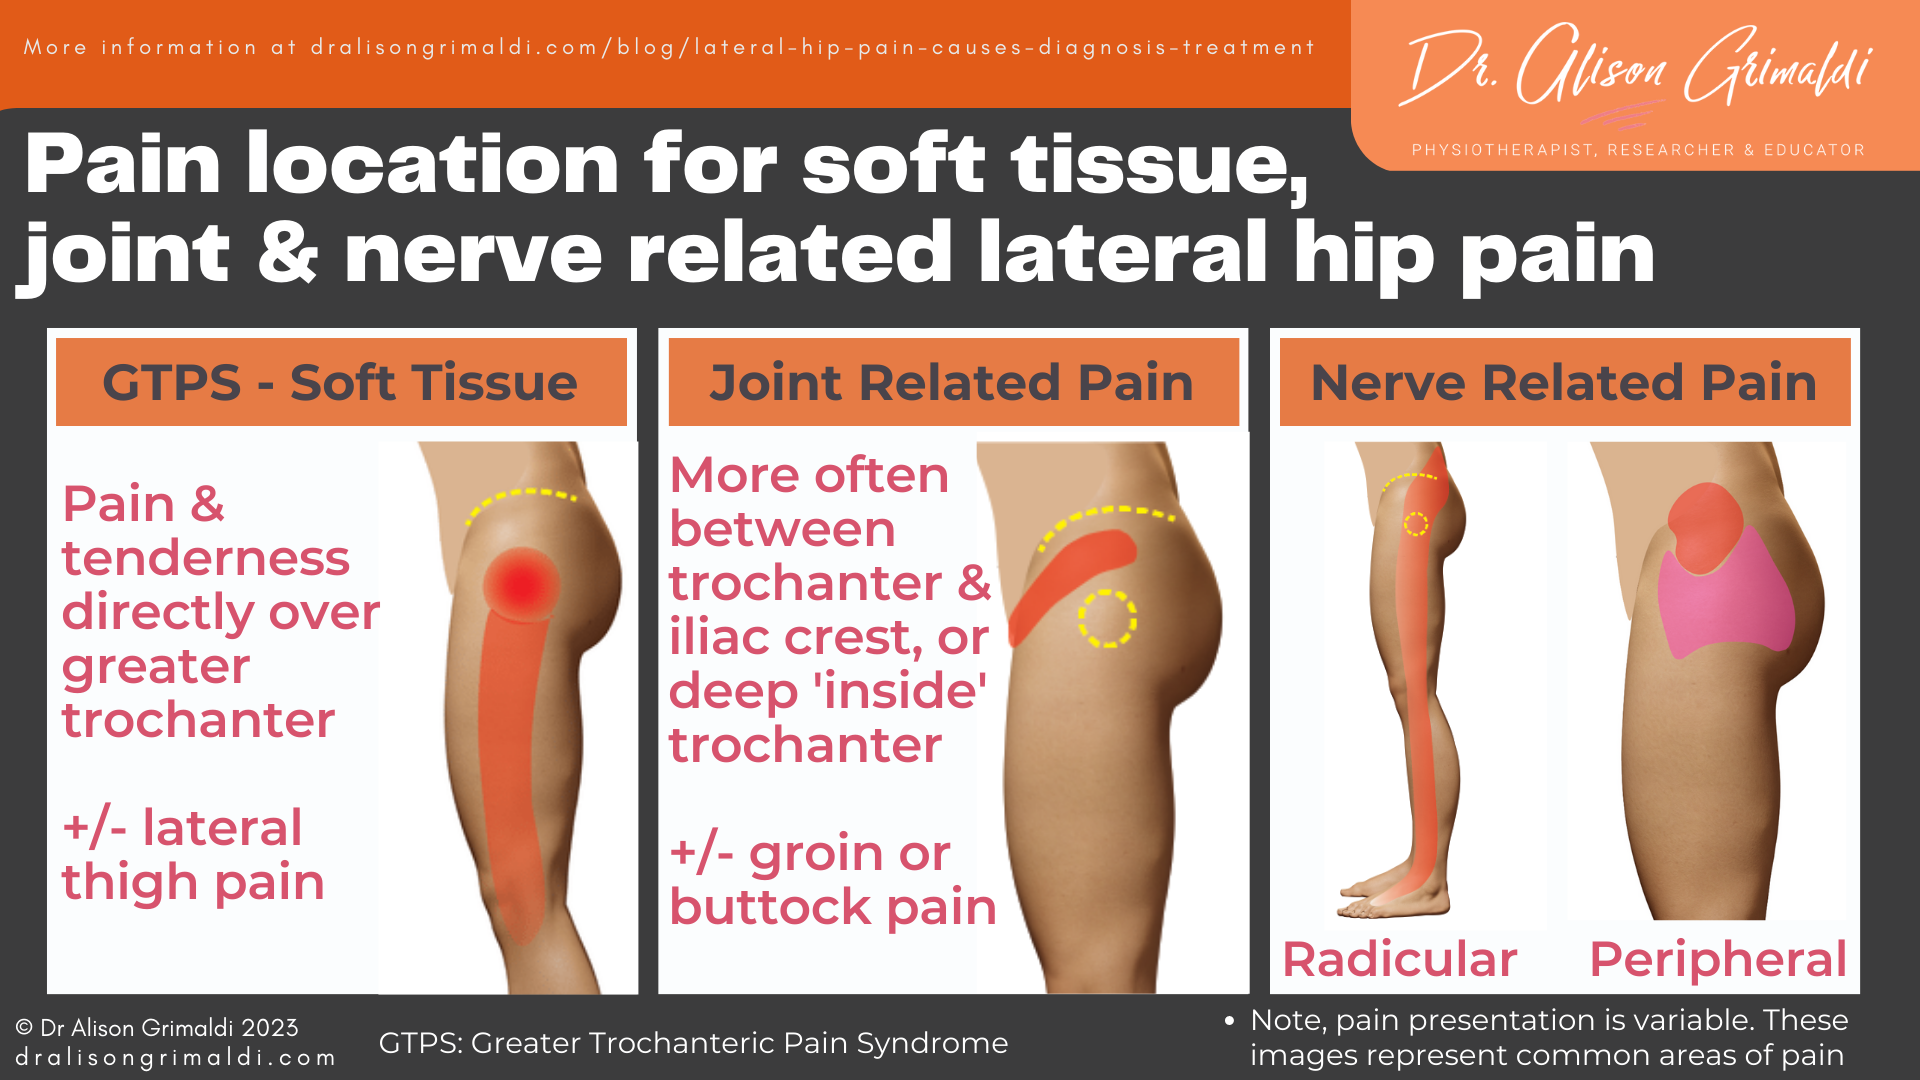 Pain-location-for-soft-tissue-joint-&-nerve-related-lateral-hip-pain